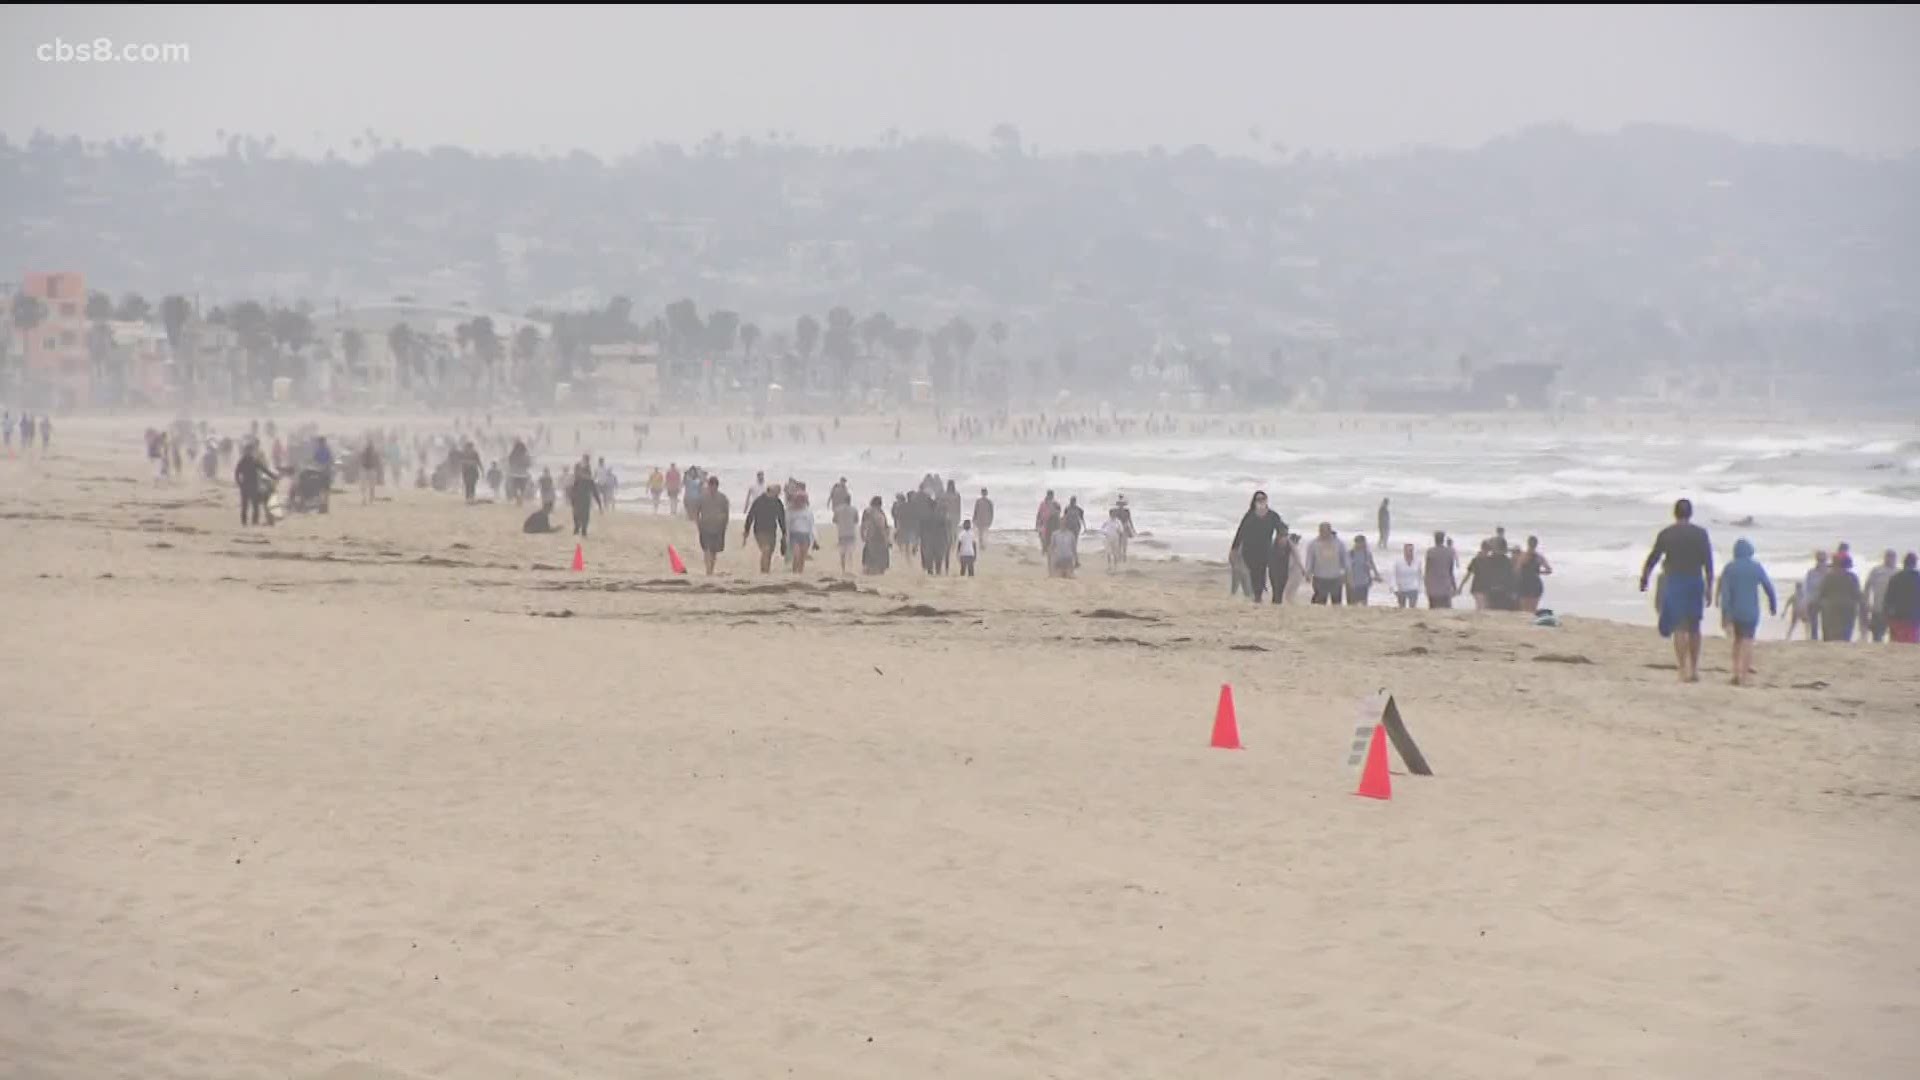 Officials told News 8 for the most part, people followed the rules on San Diego beaches. But, it's been a much different story in other parts of the country.